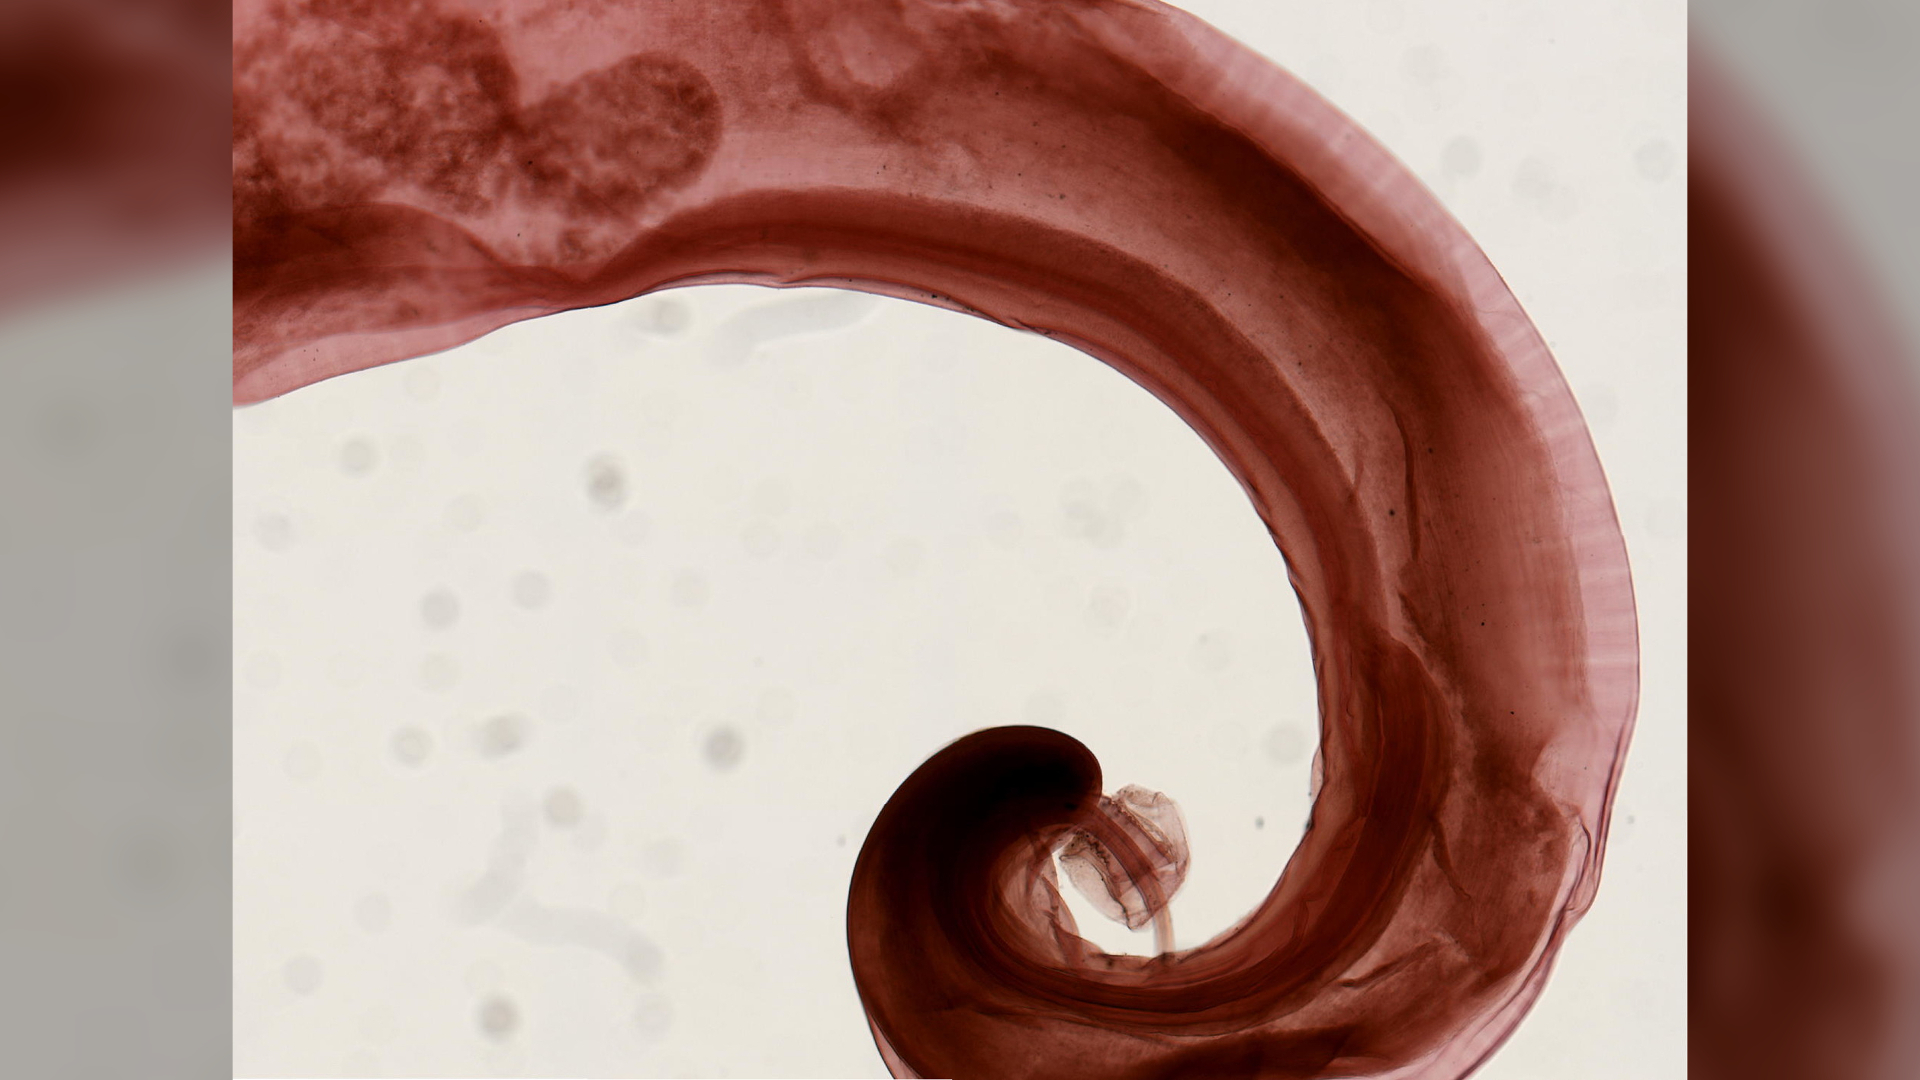 A picture of the parasitic worm that causes trichuriasis.